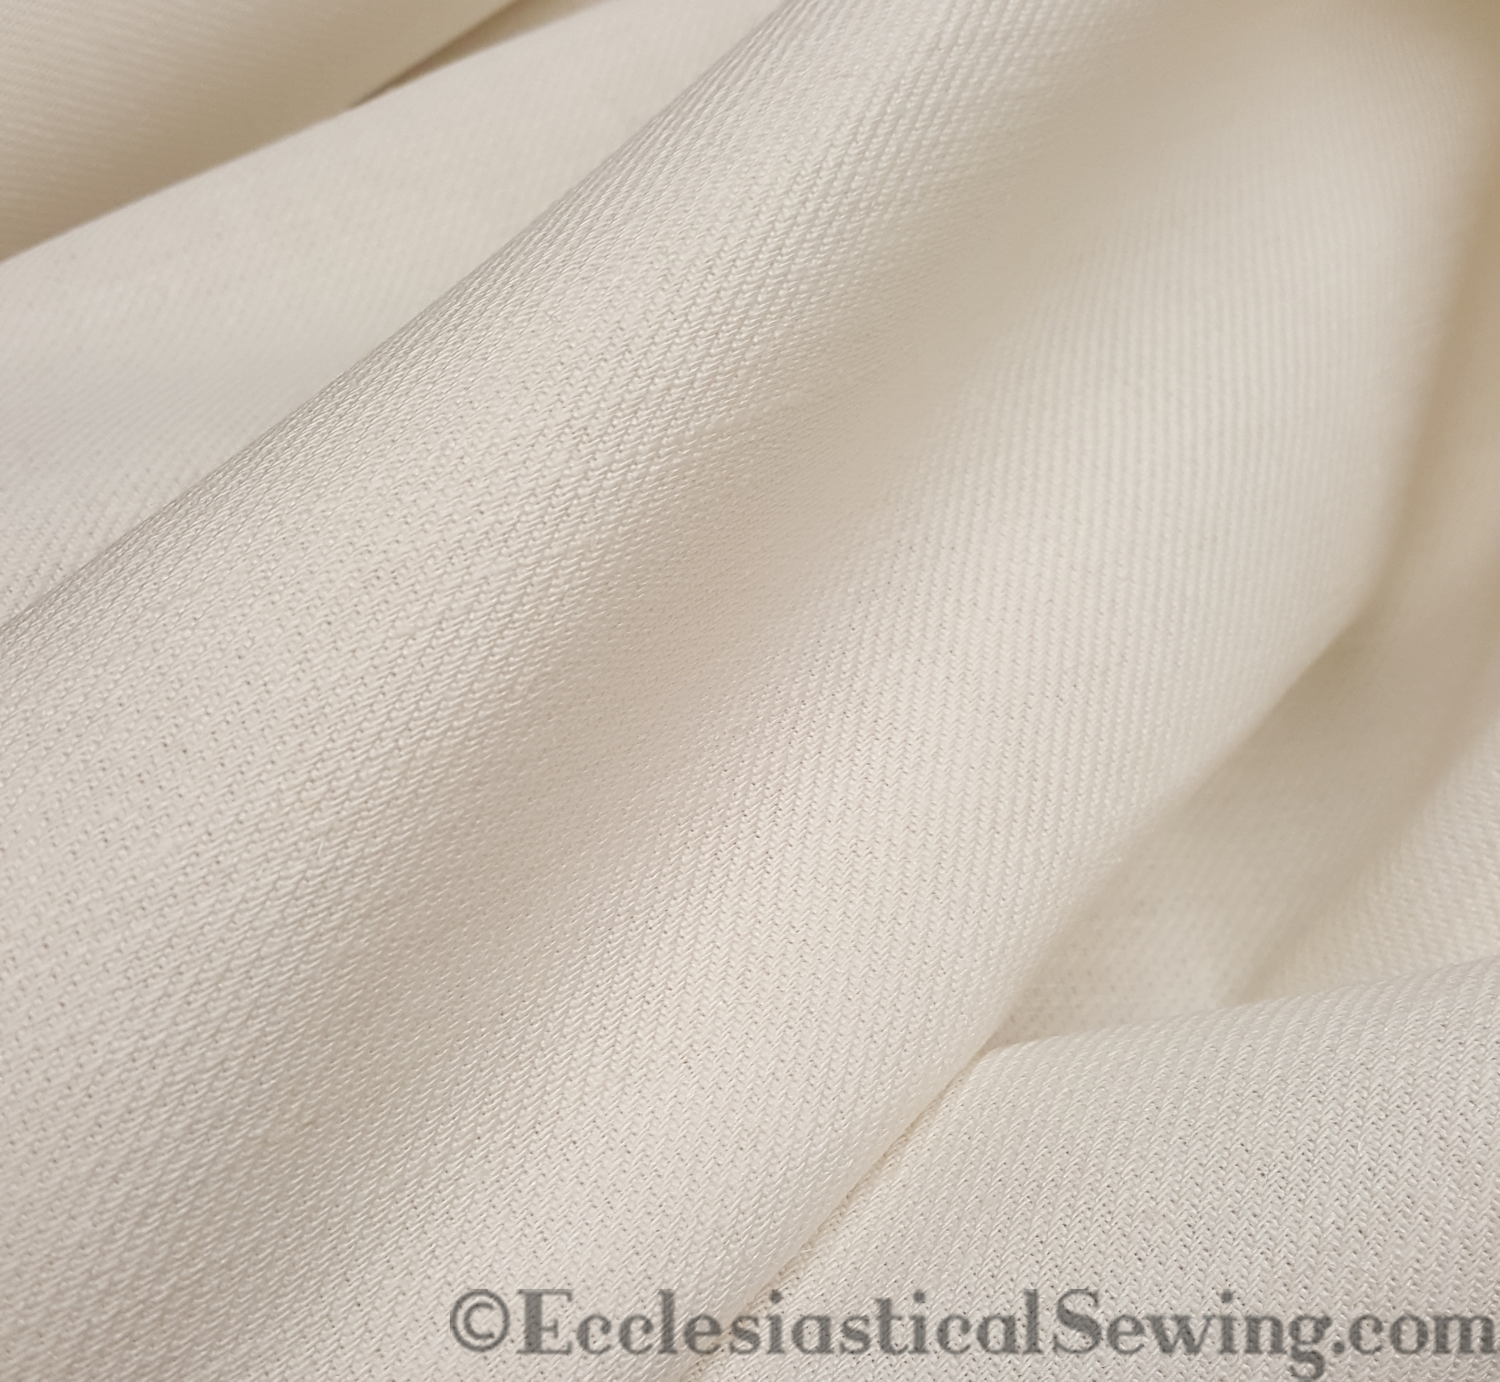 Dowlas Linen for Pastor and Priest Stoles